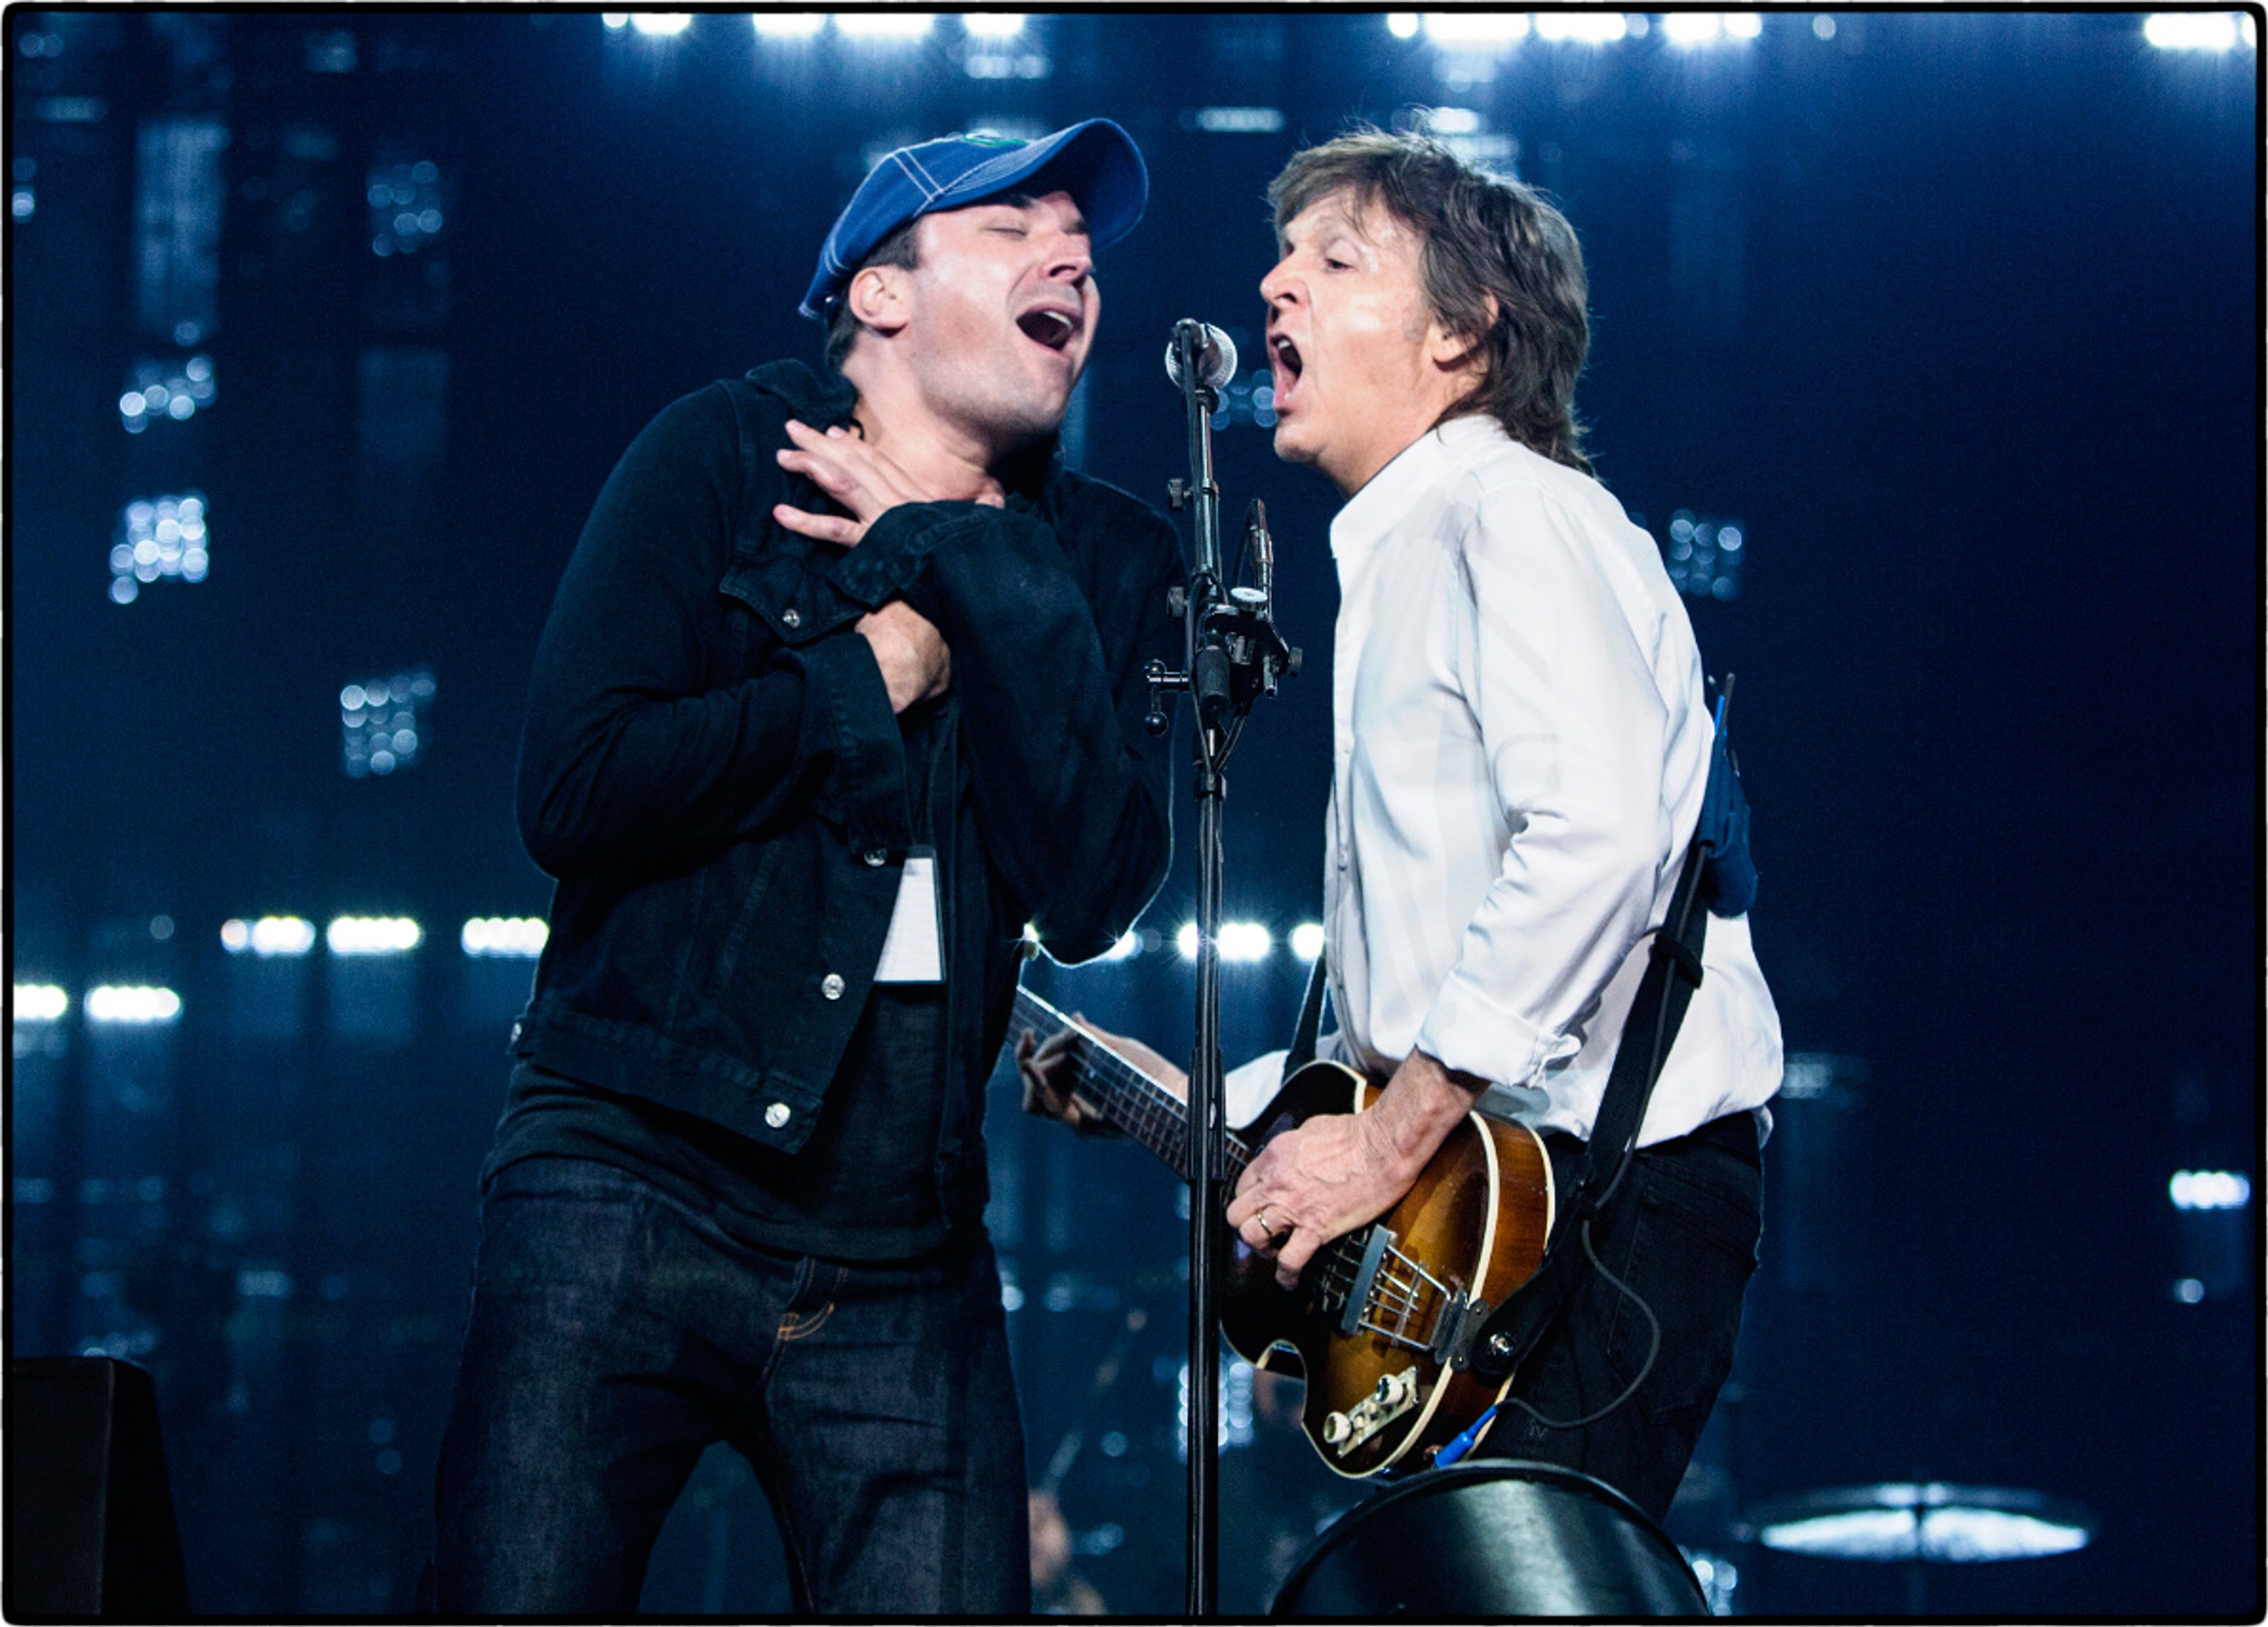 Paul performing with Jimmy Fallon at the Rogers Arena, Vancouver